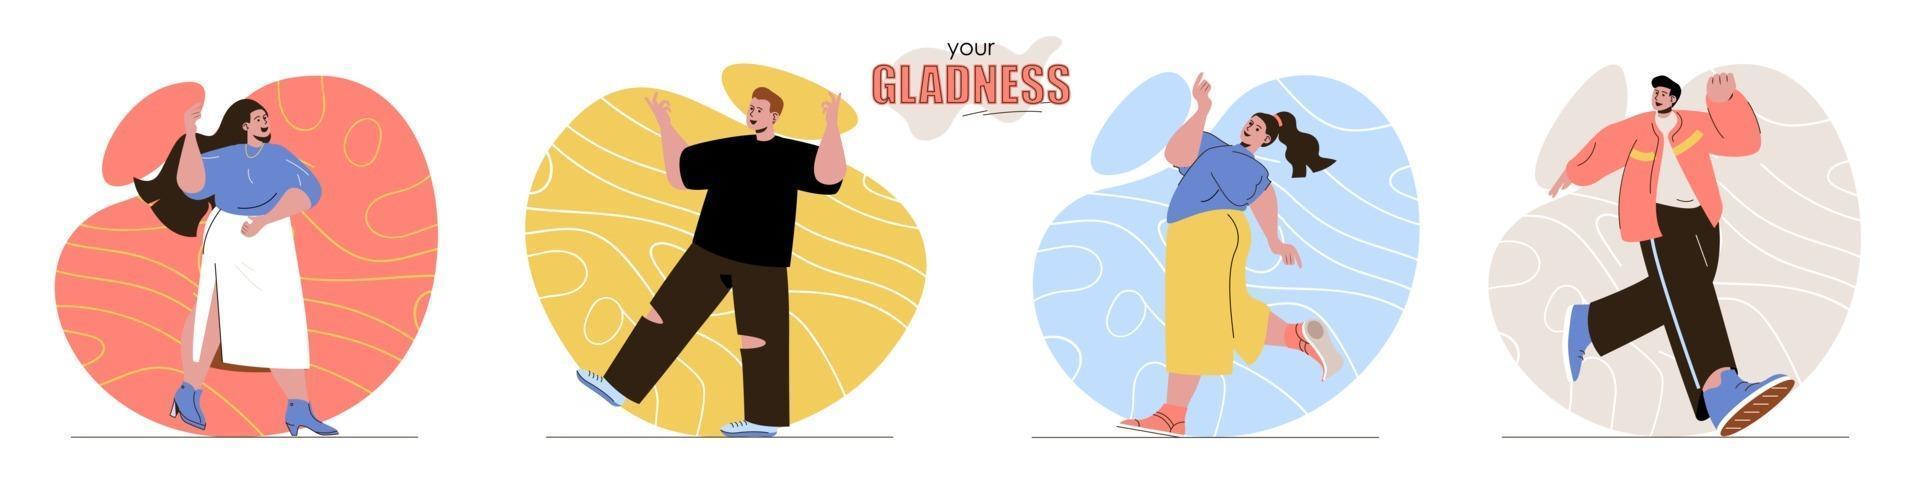 Your Gladness concept scenes set vector